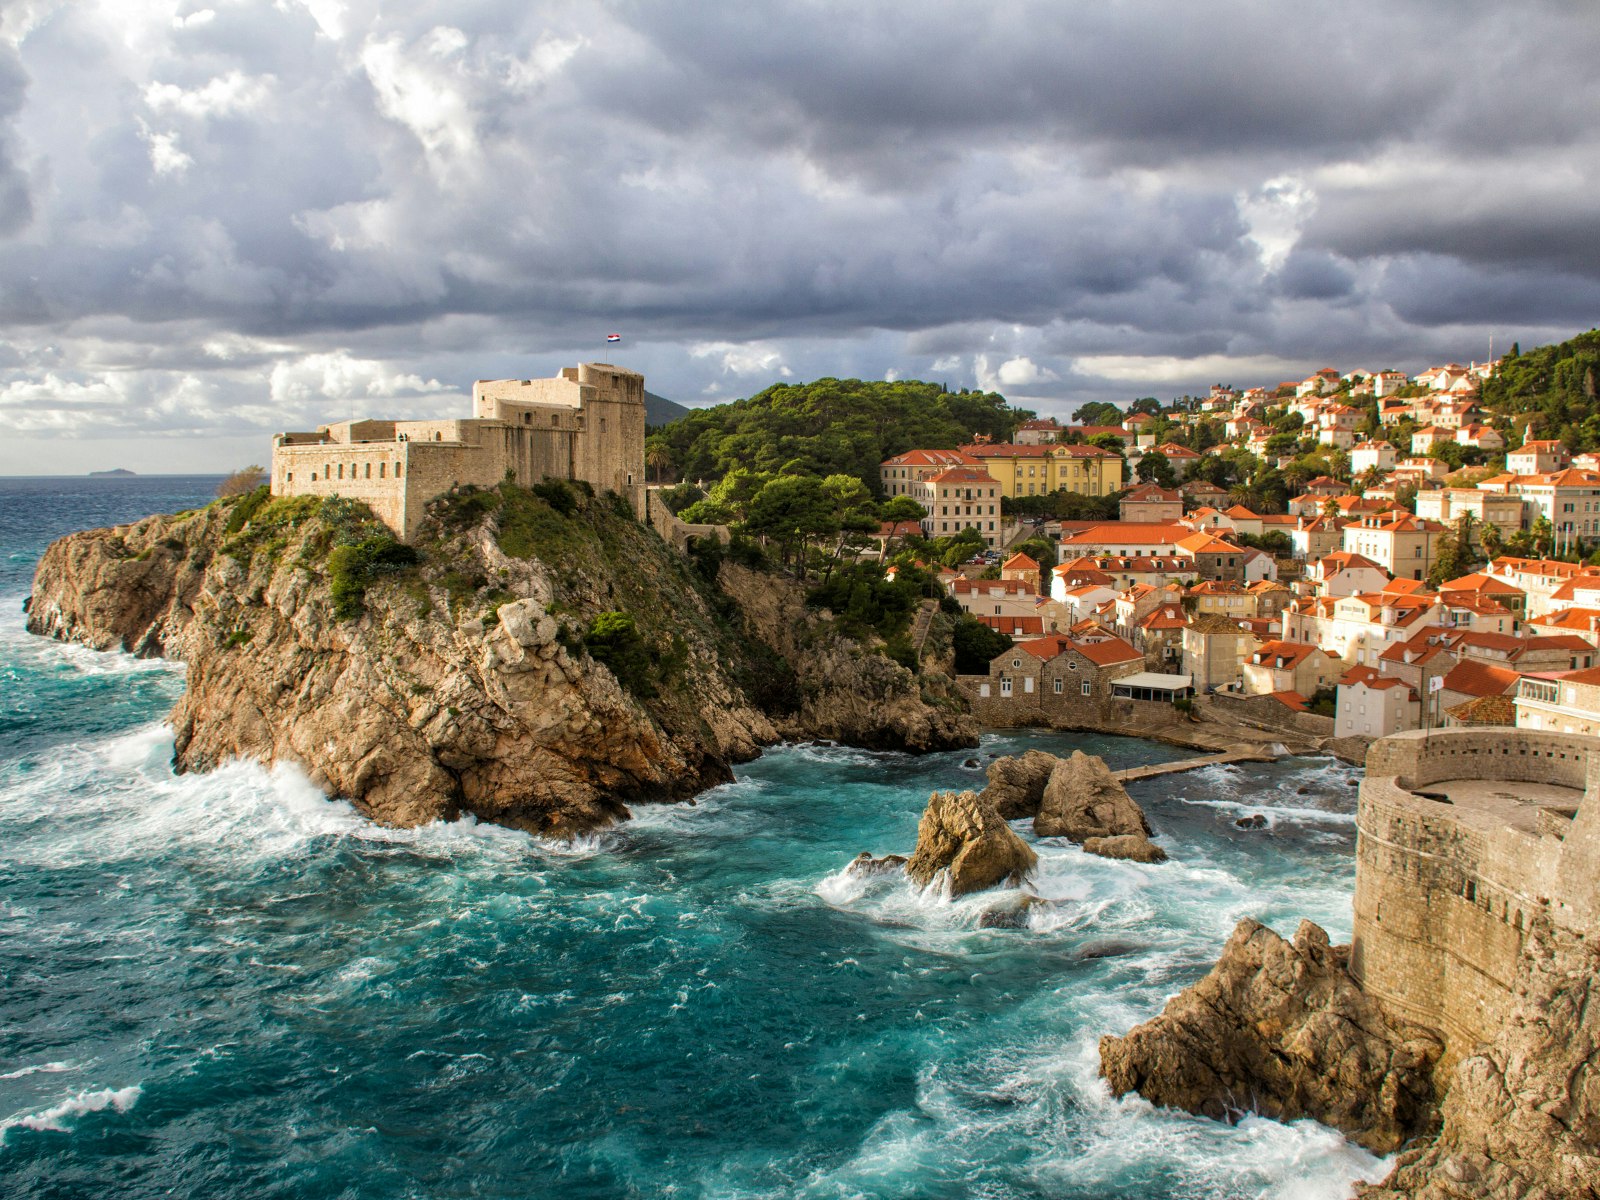 Dubrovnik's walls and forts